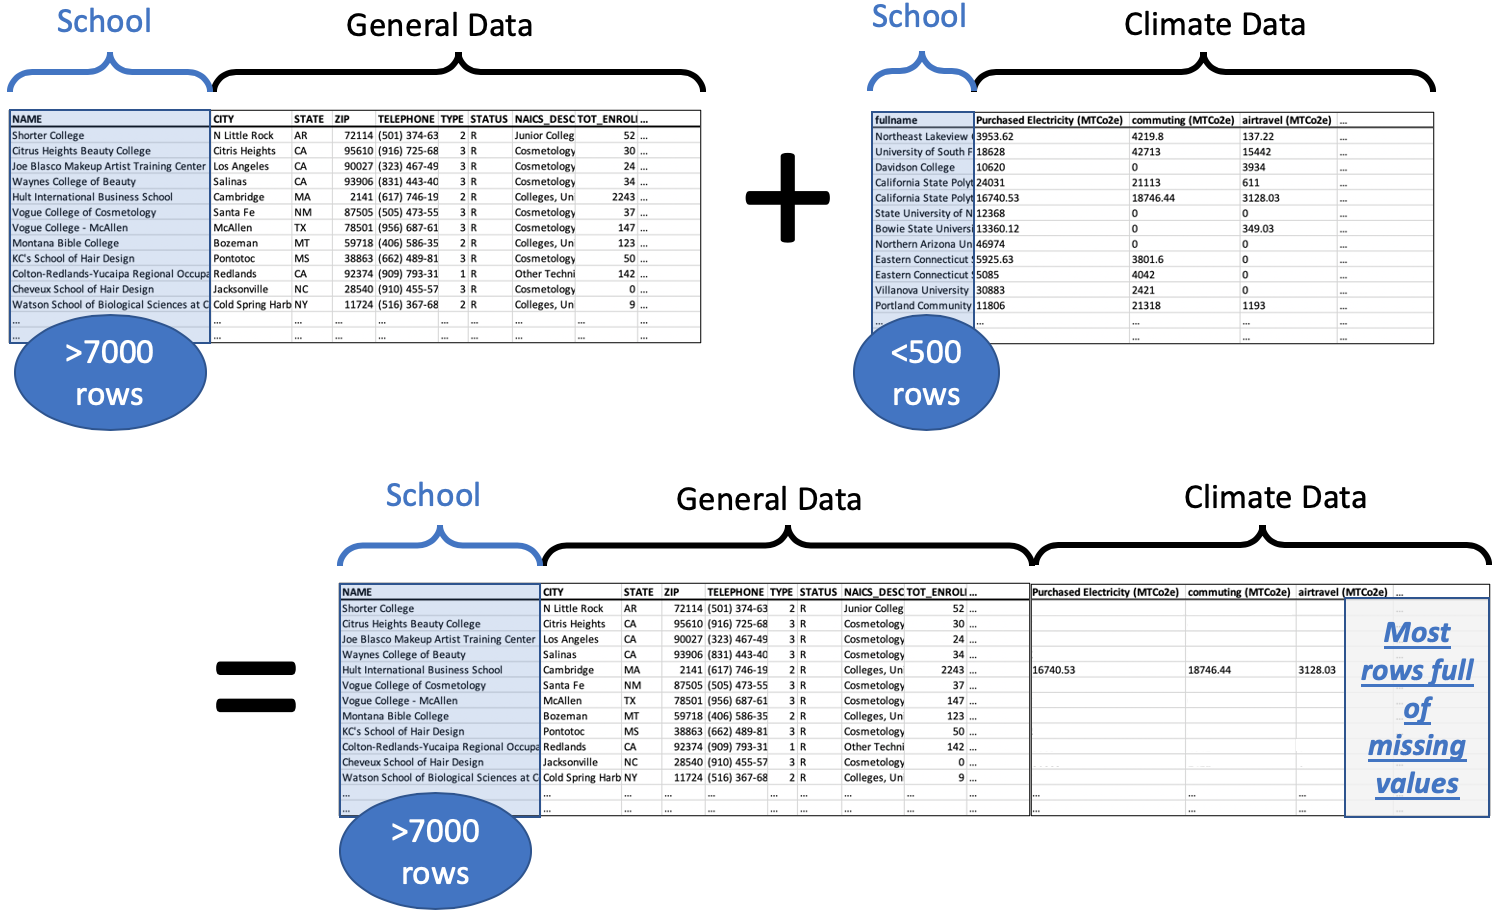 Merging a comprehensive higher education dataset with climate data about a subset of its schools